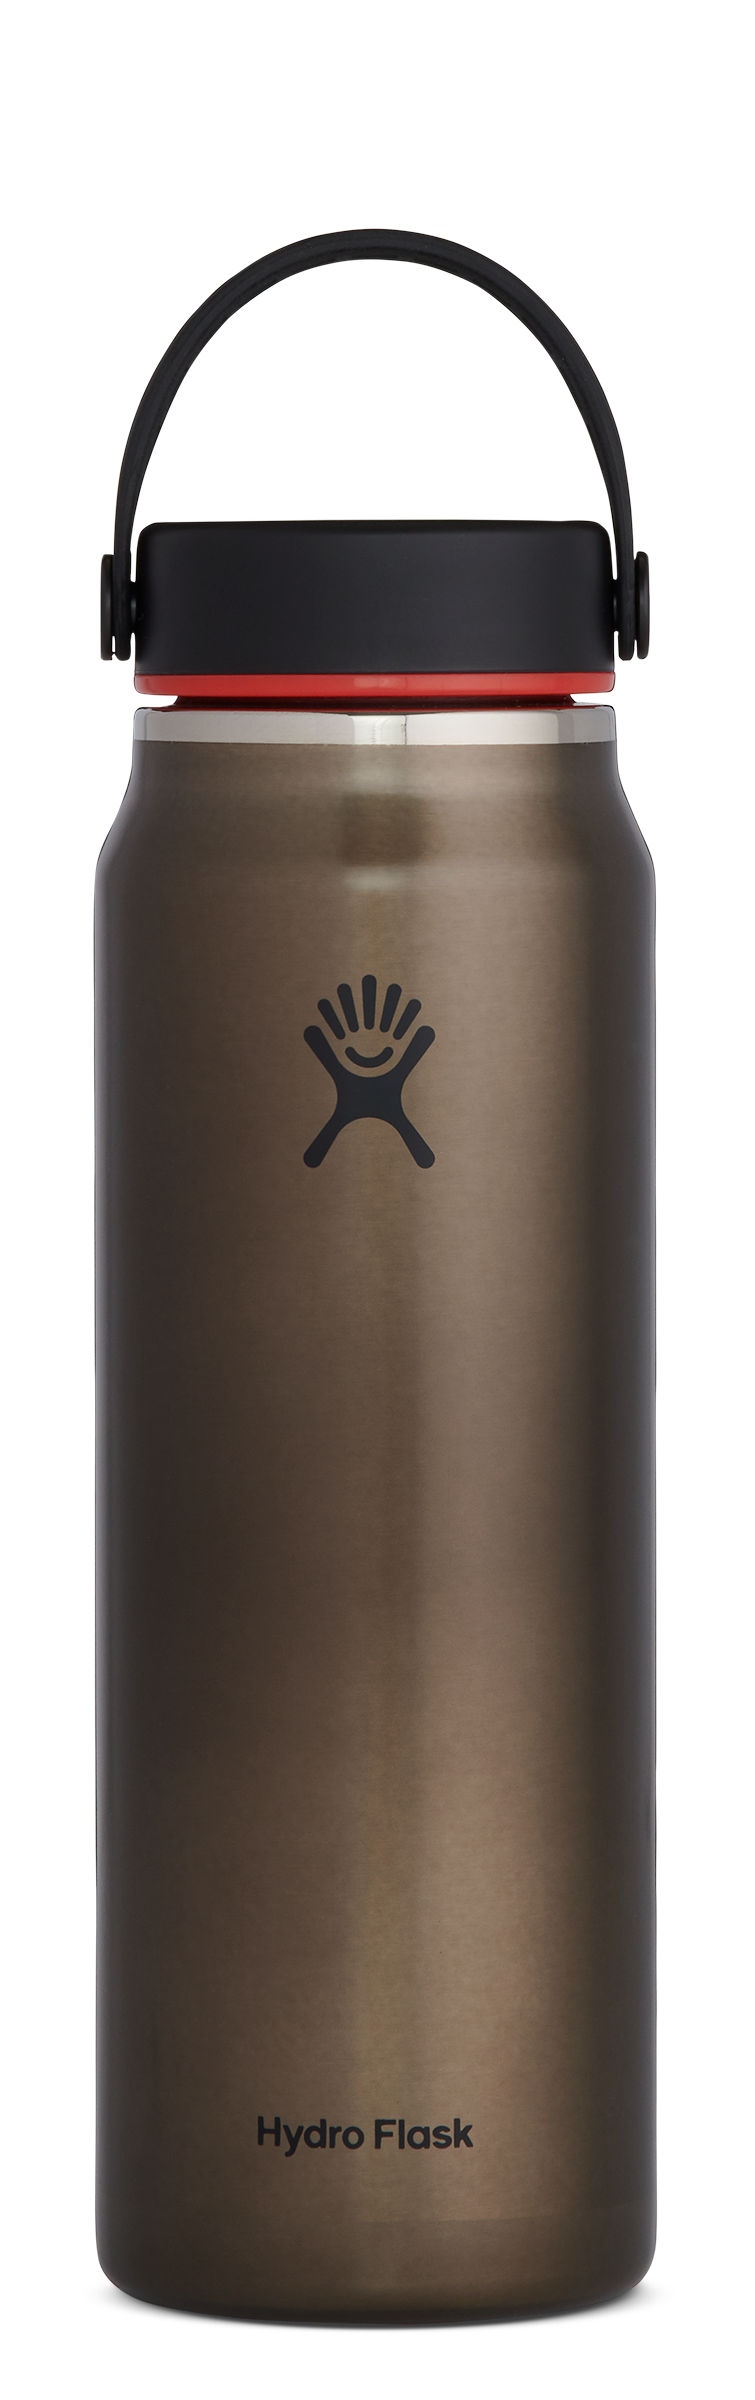 https://springpr.com/wp-content/uploads/2020/04/Hydro-Flask-32-oz-WIde-Mouth-Trail-Obsidian-%C2%A349.95.png